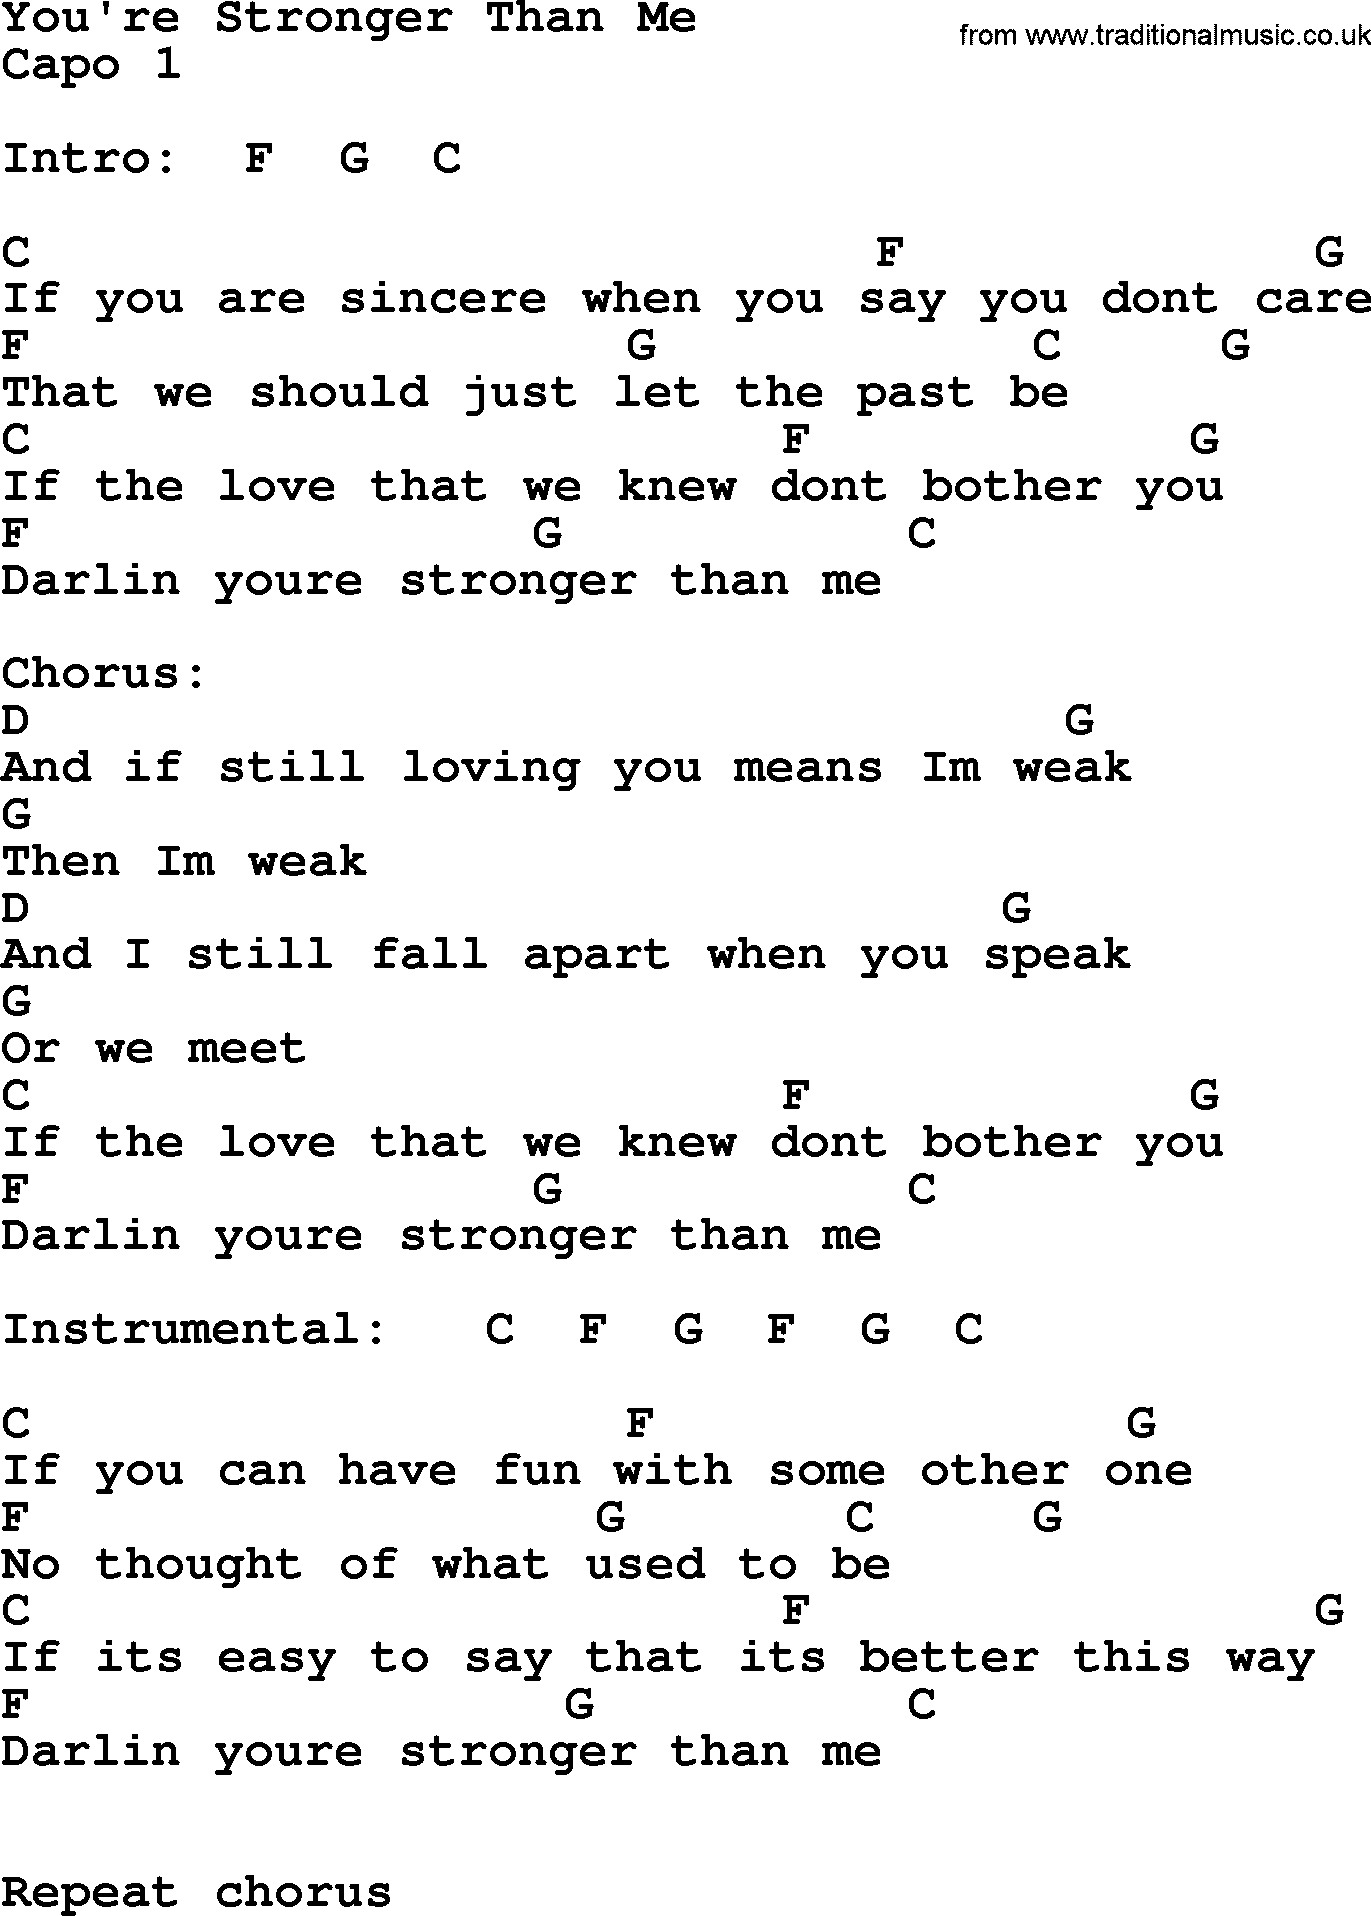 George Strait song: You're Stronger Than Me, lyrics and chords